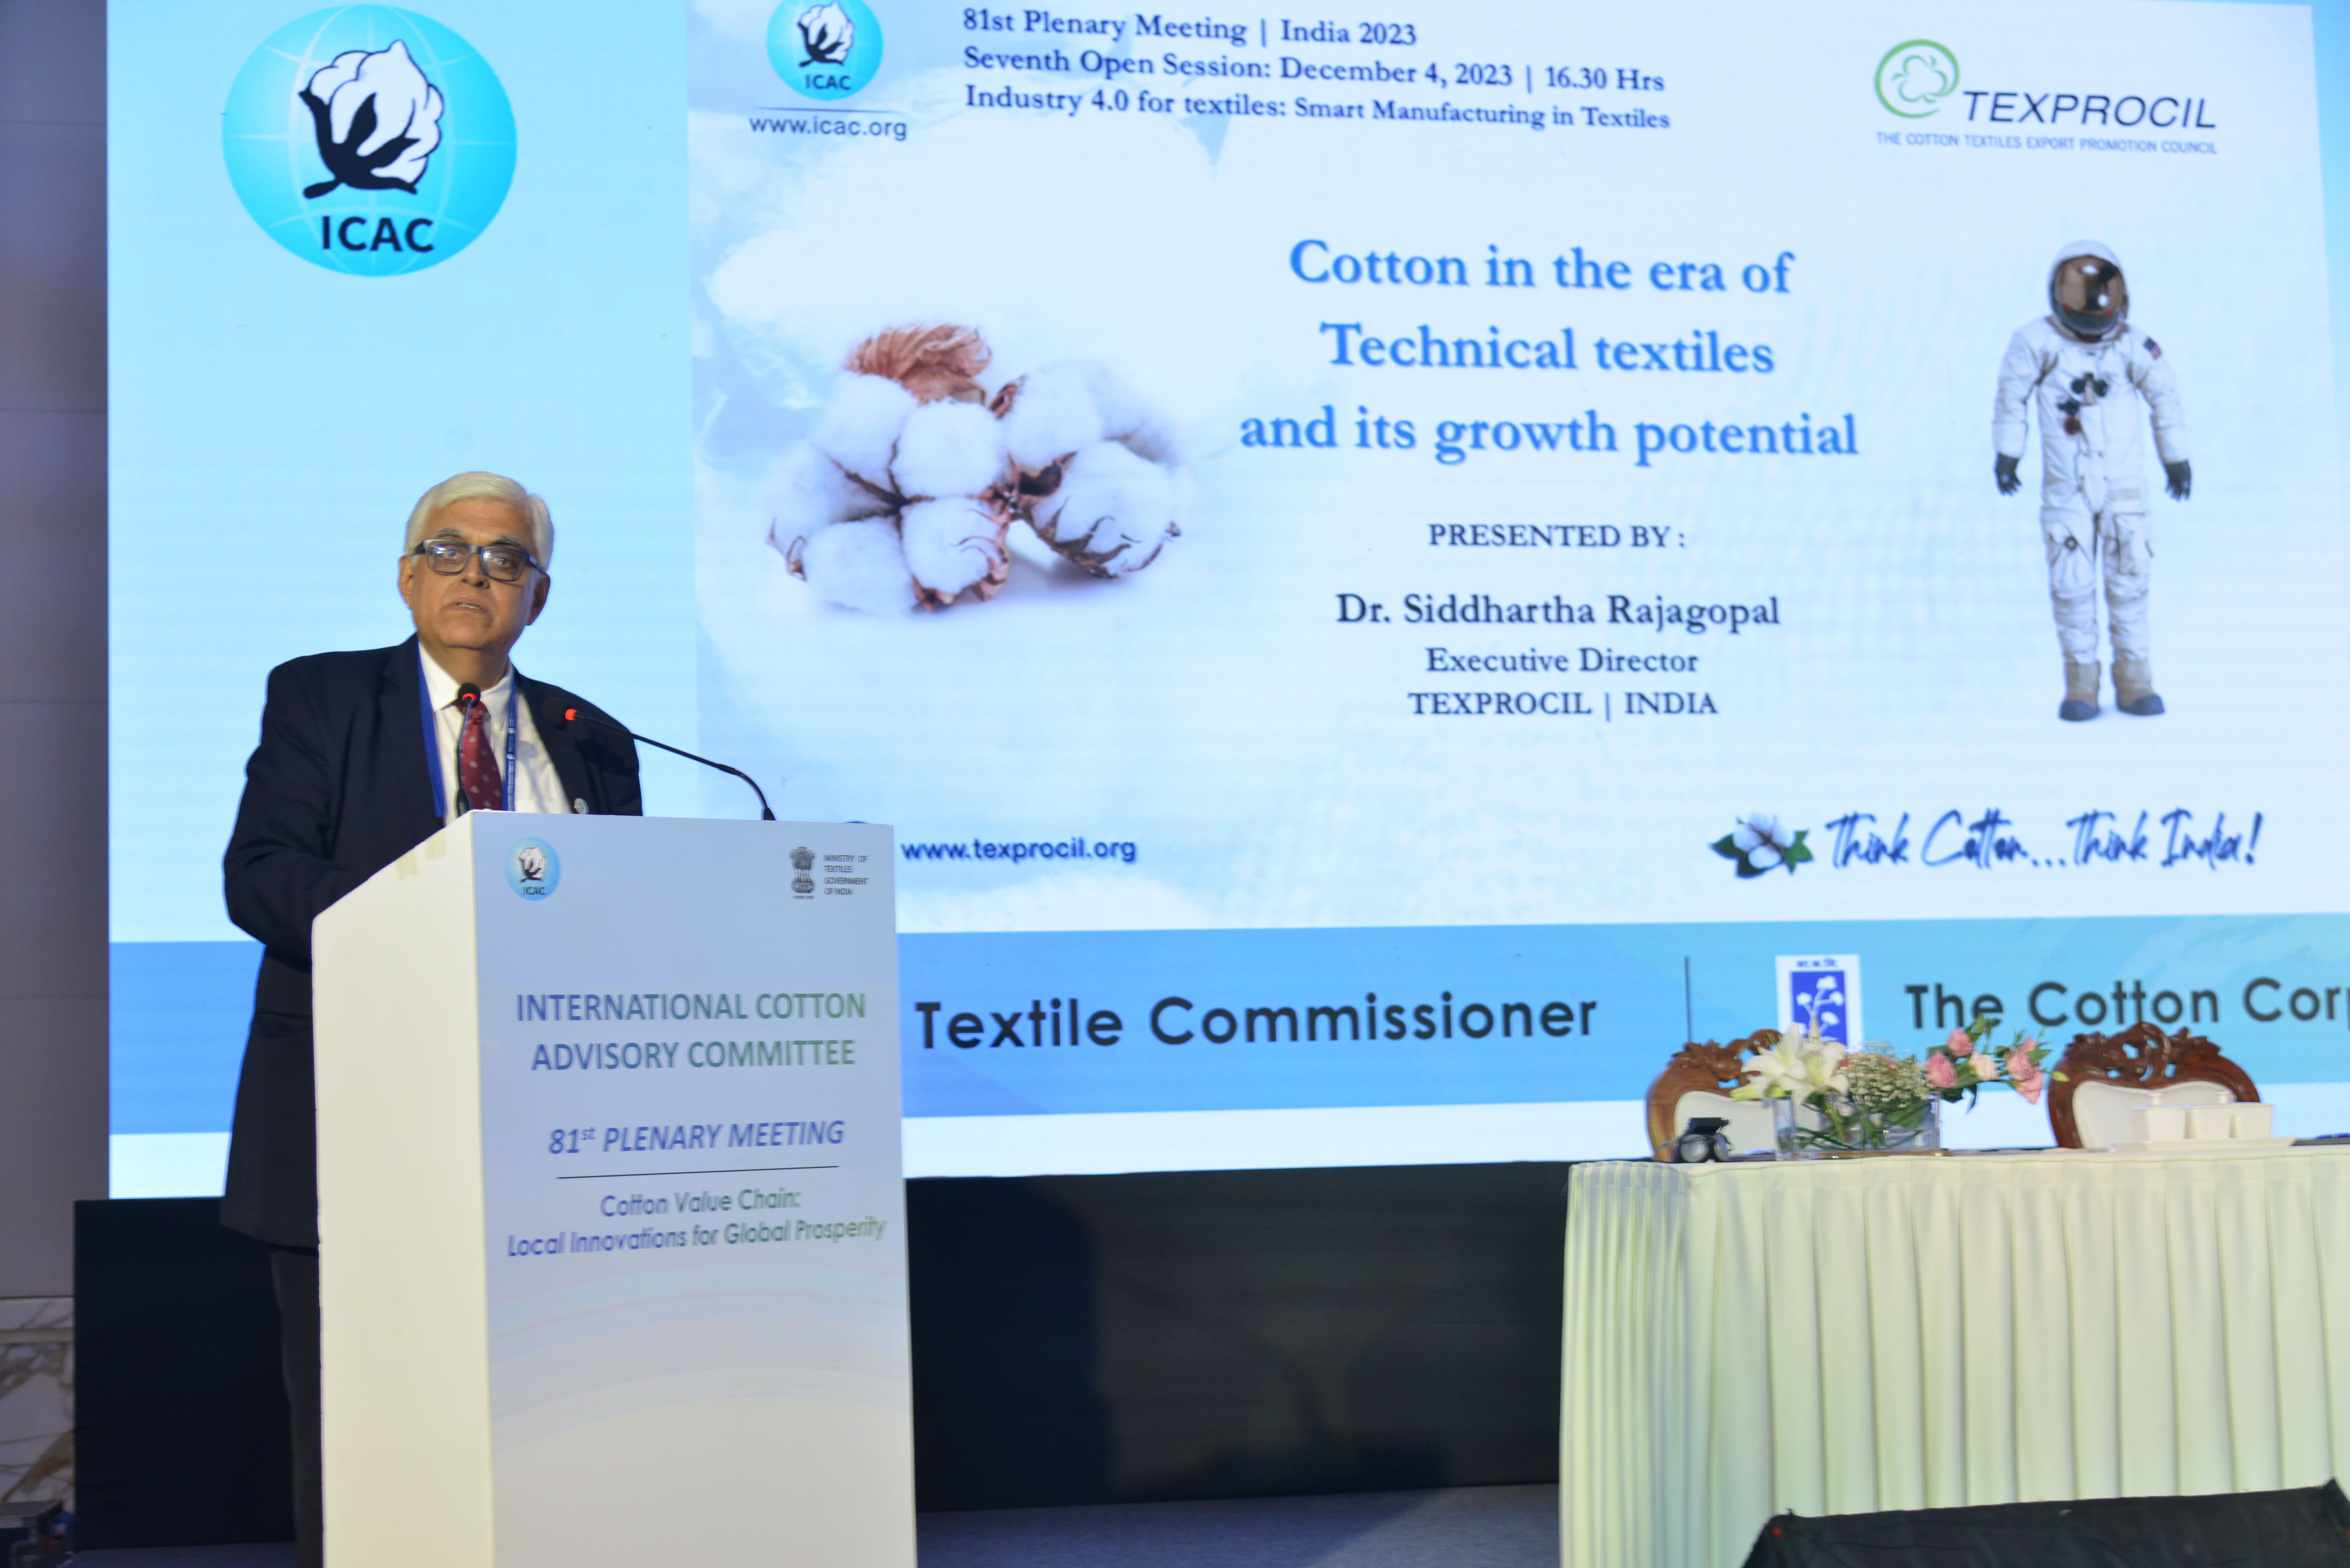  Dr. Siddhartha Rajagopal, Exectutive Director, TEXPROCIL made presentation at the 81st Plenary Meeting of the (ICAC) held on 2nd Dec 2023 at the Jio Convention Centre, Mumbai.